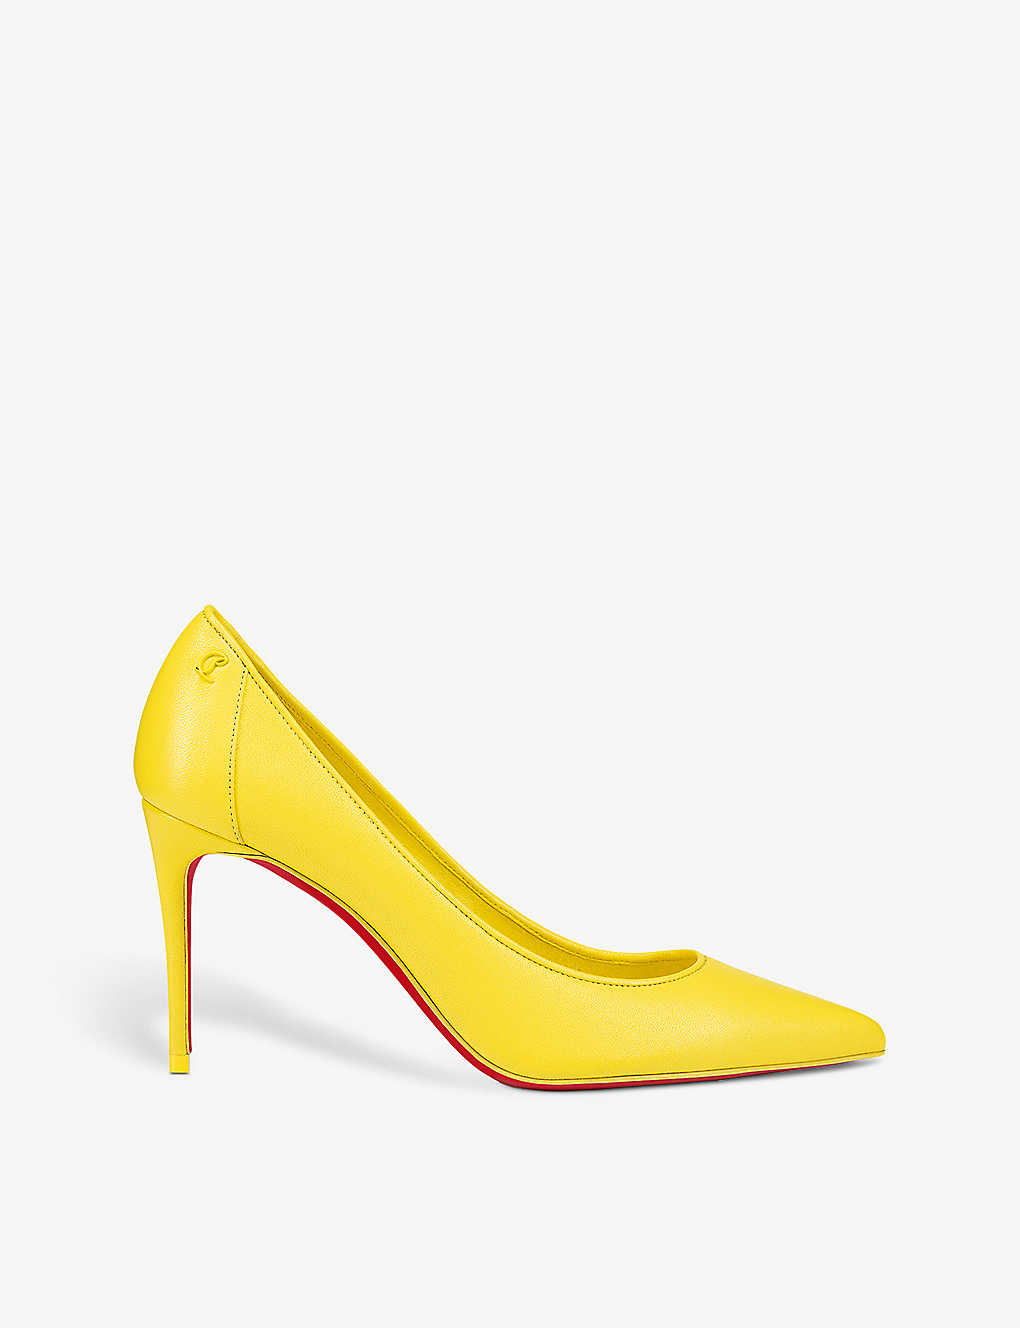 Shop Christian Louboutin Women's Yellow Queen Sporty Kate 85 Leather Heeled Courts